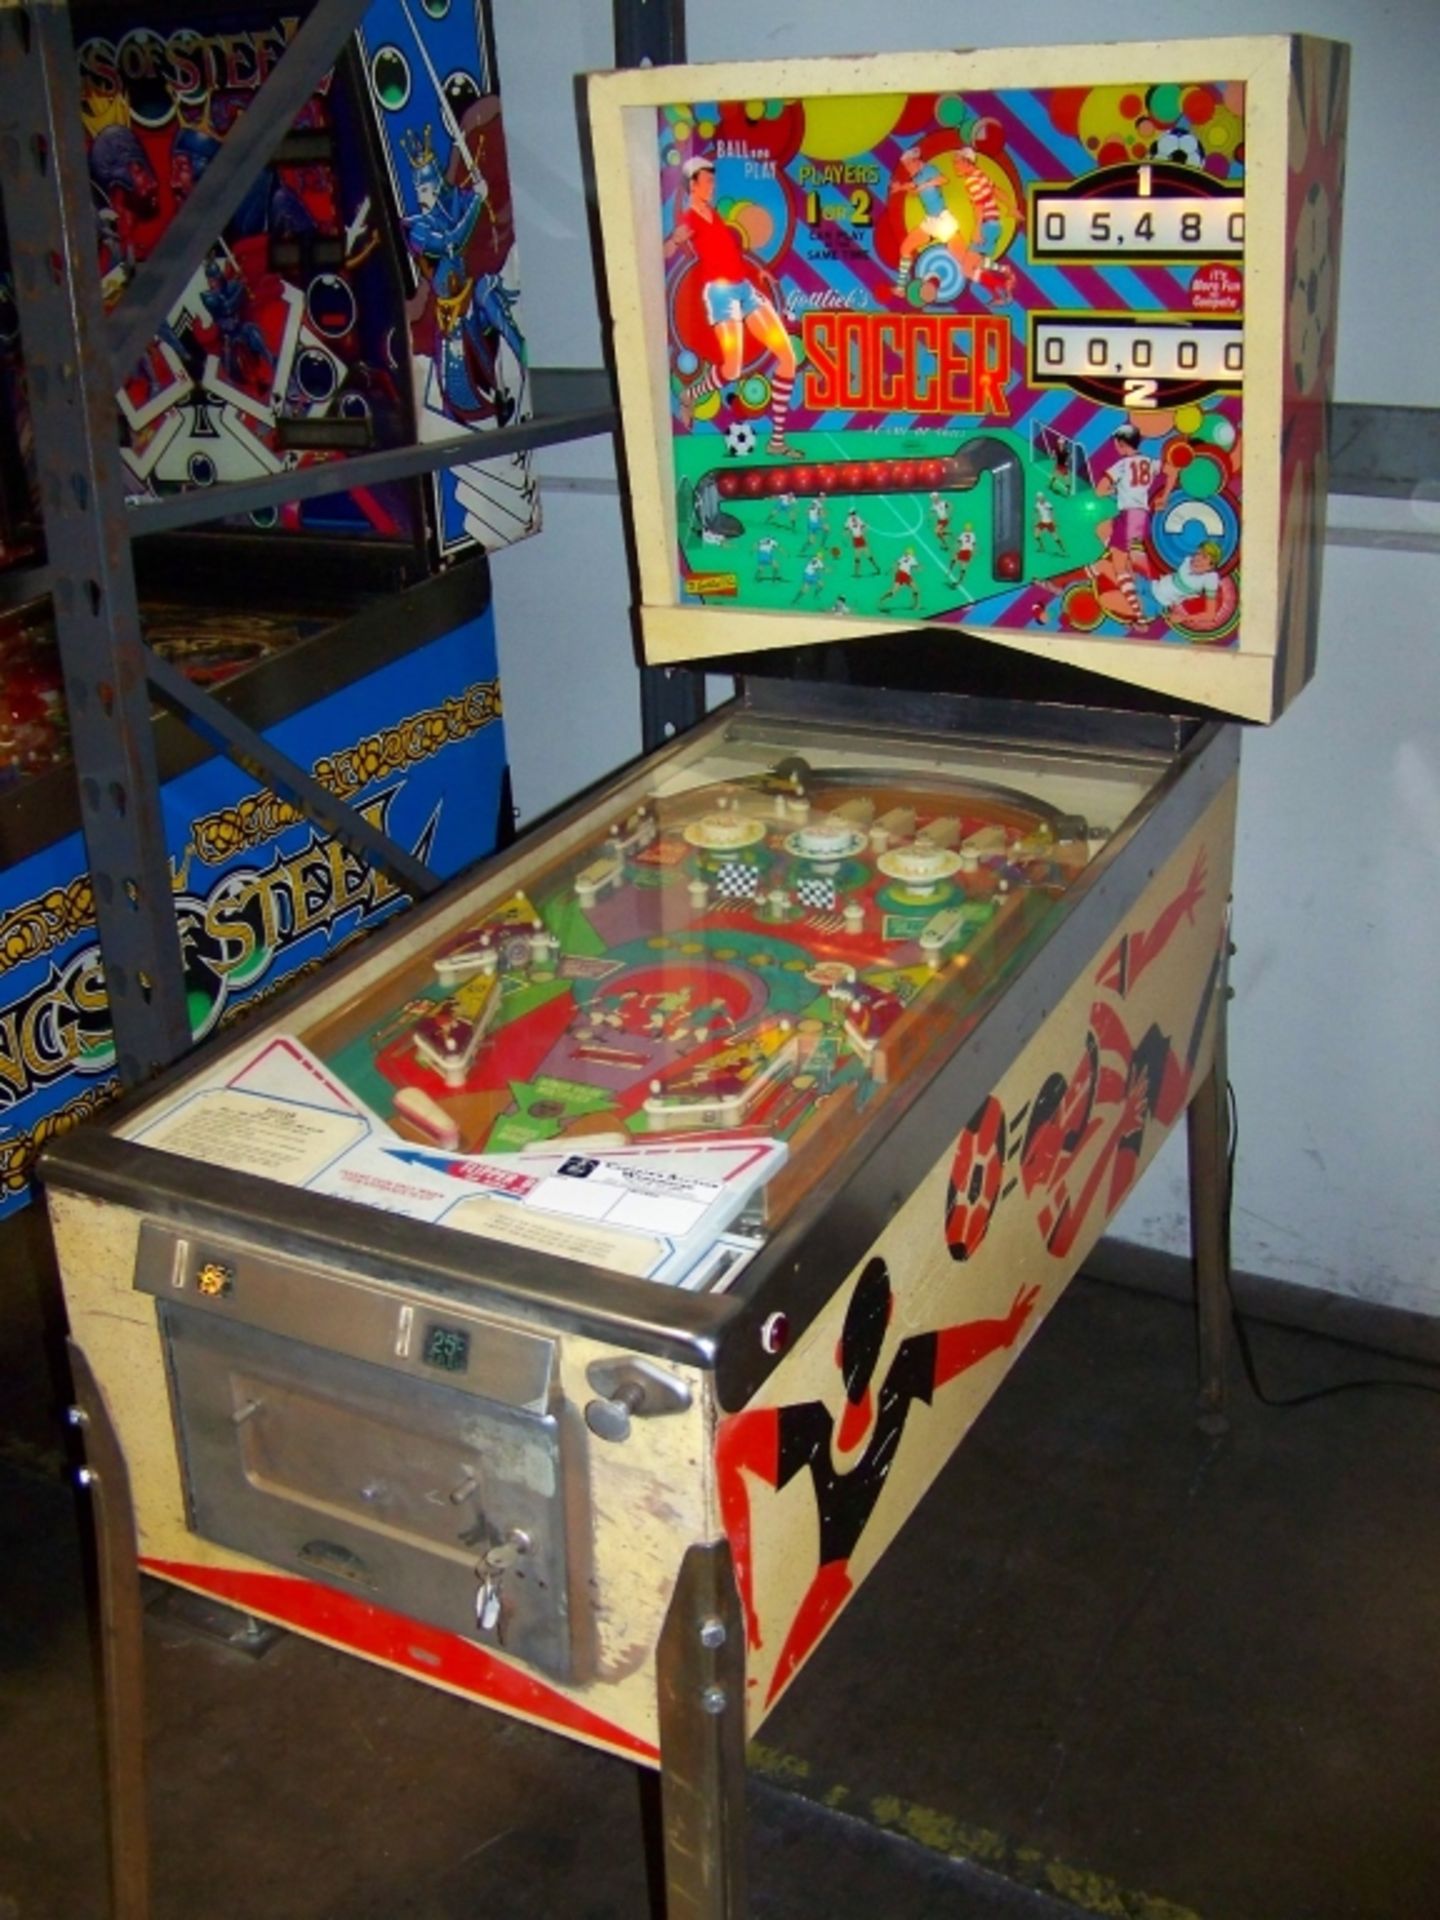 SOCCER PINBALL MACHINE ANIMATED BOX GOTTLIEB 1975 Item is in used condition. Evidence of wear and - Image 7 of 8